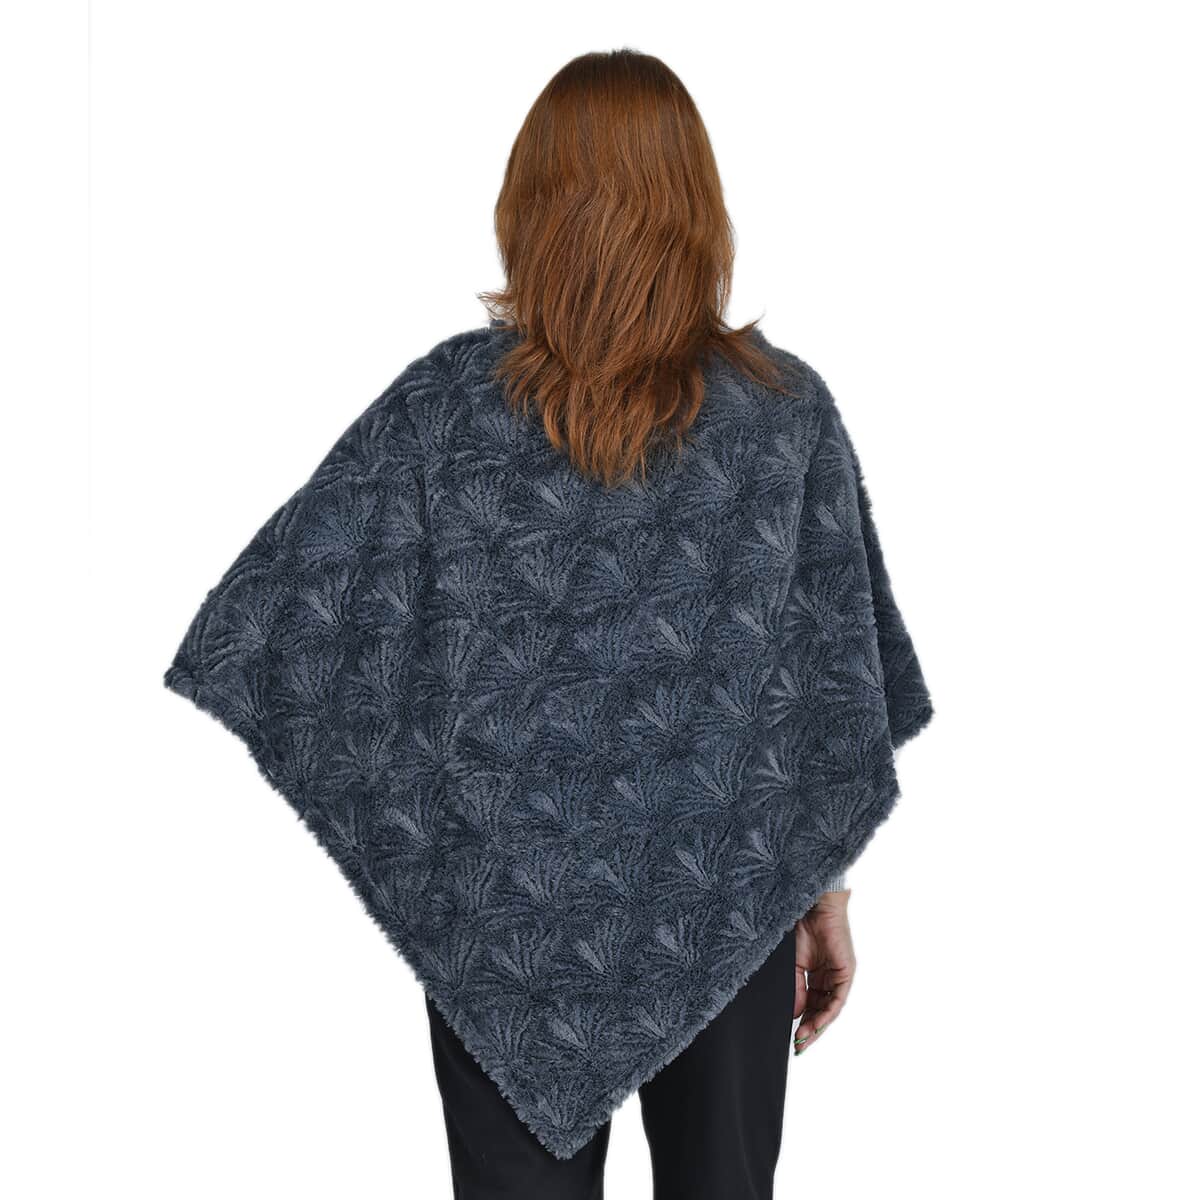 " PASSAGE Faux fur poncho Material: 100% polyester. Size: W33.5XL39 inch Weight:185g Color: Black " image number 1